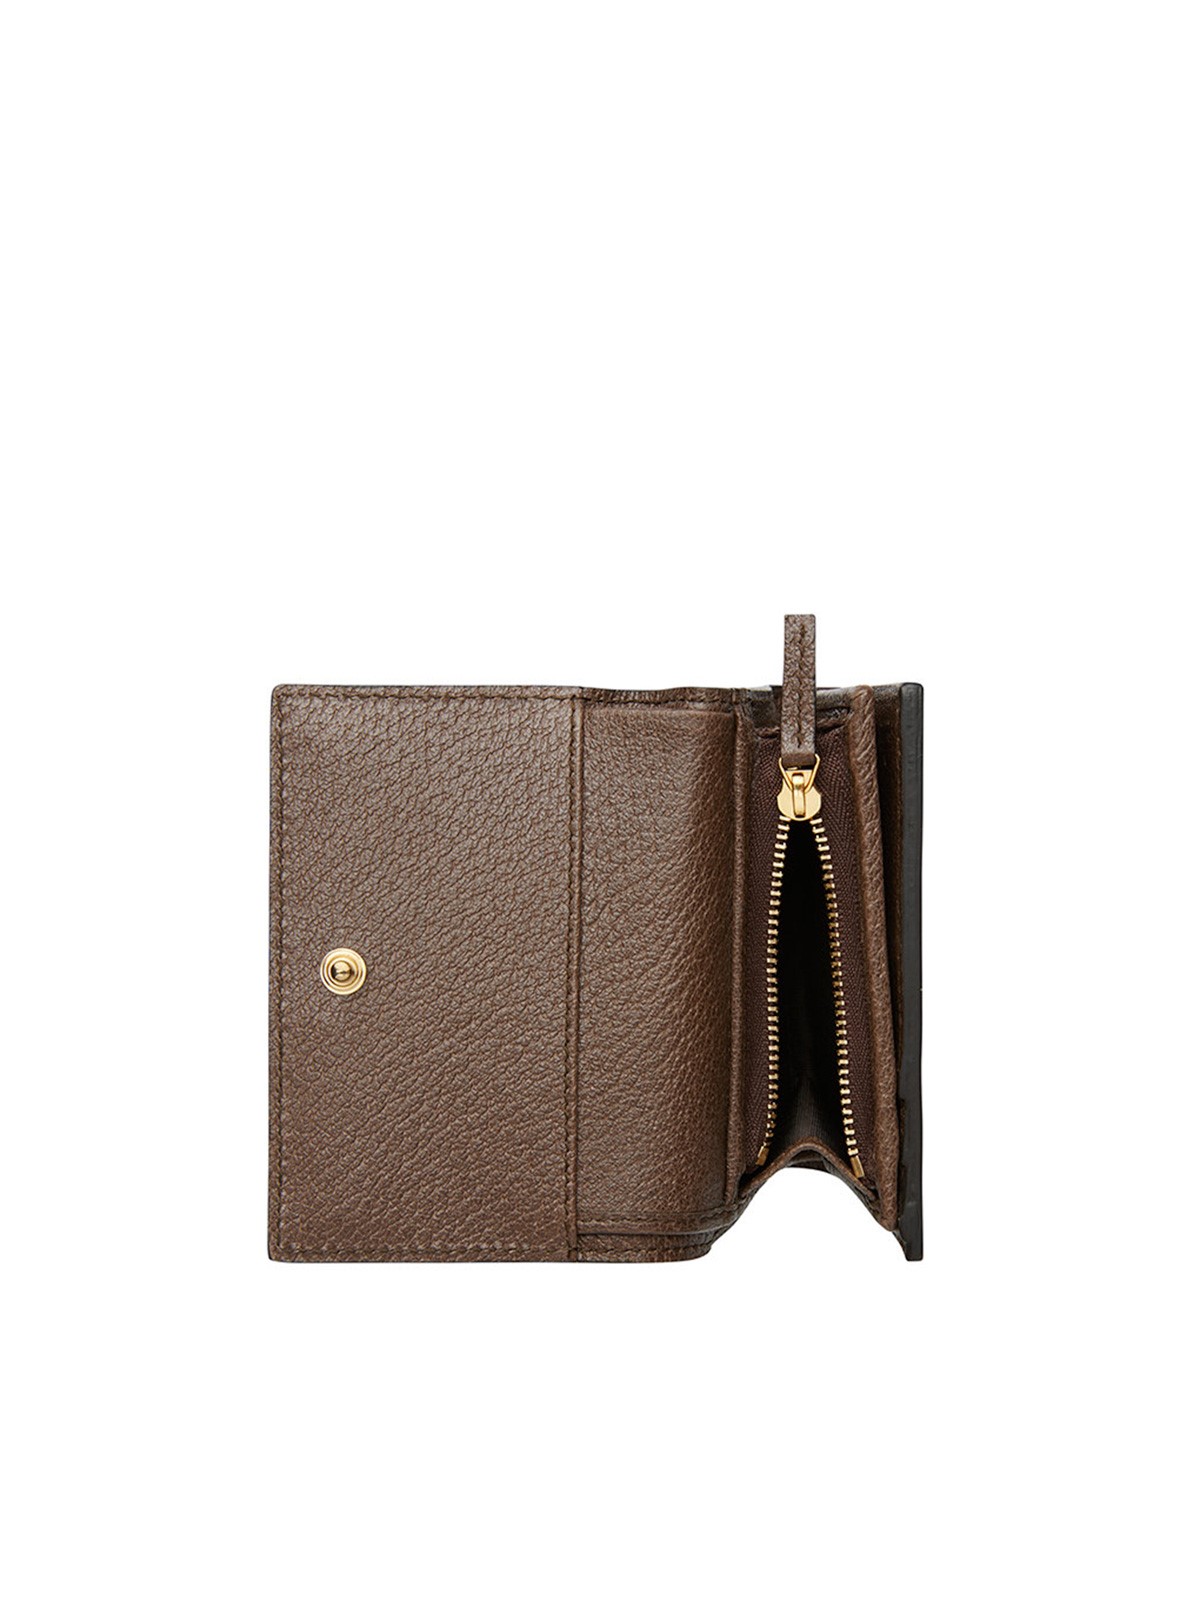 gucci OPHIDIA WALLET available on literacybasics.ca - 22770